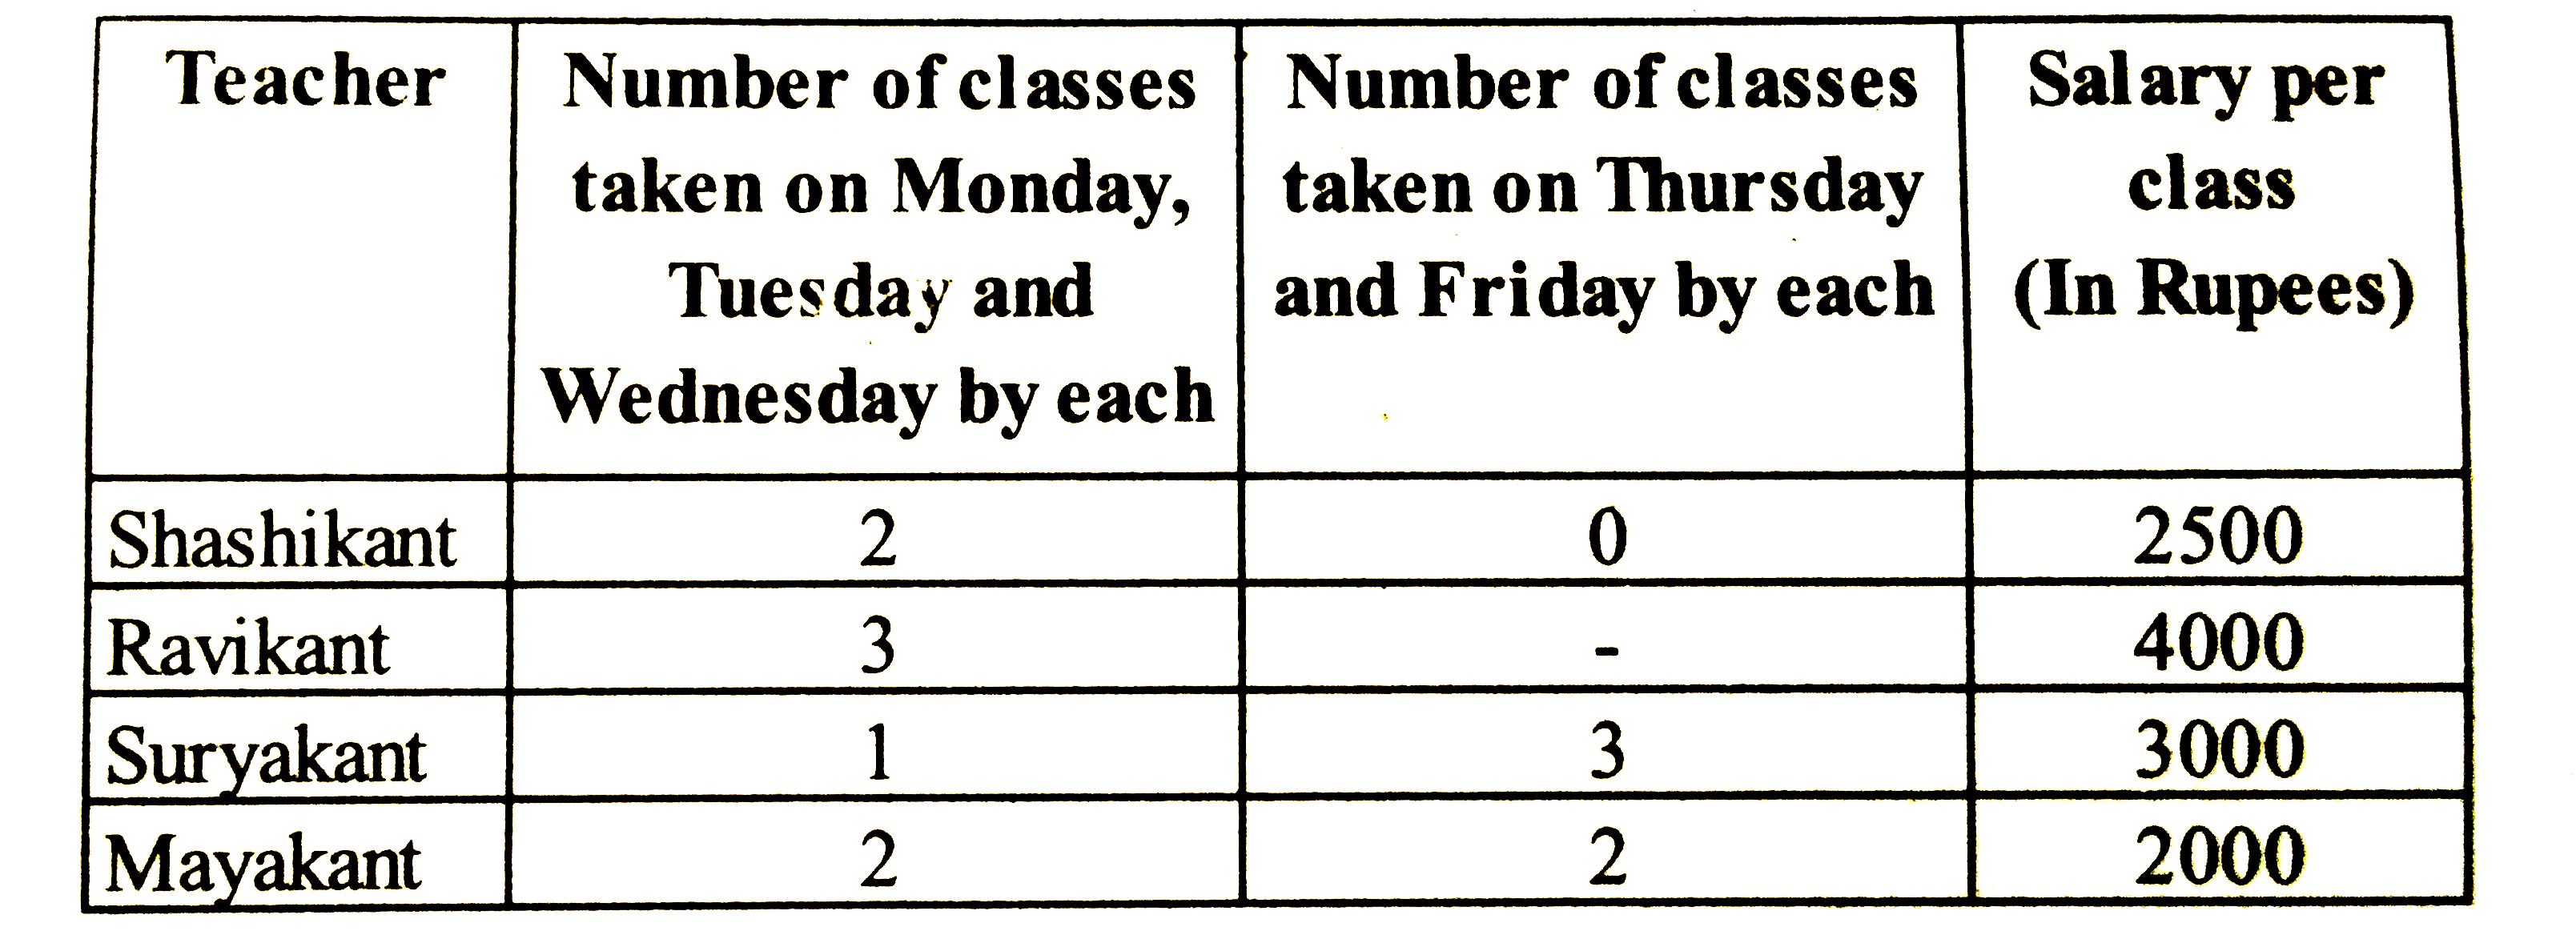 The following table shows the number of classes taken by each Teacher in different days and the total number amount given to the Teacher per class For the certain course also given      Find the average made by Surykant if he teaches for 6 weeks ?